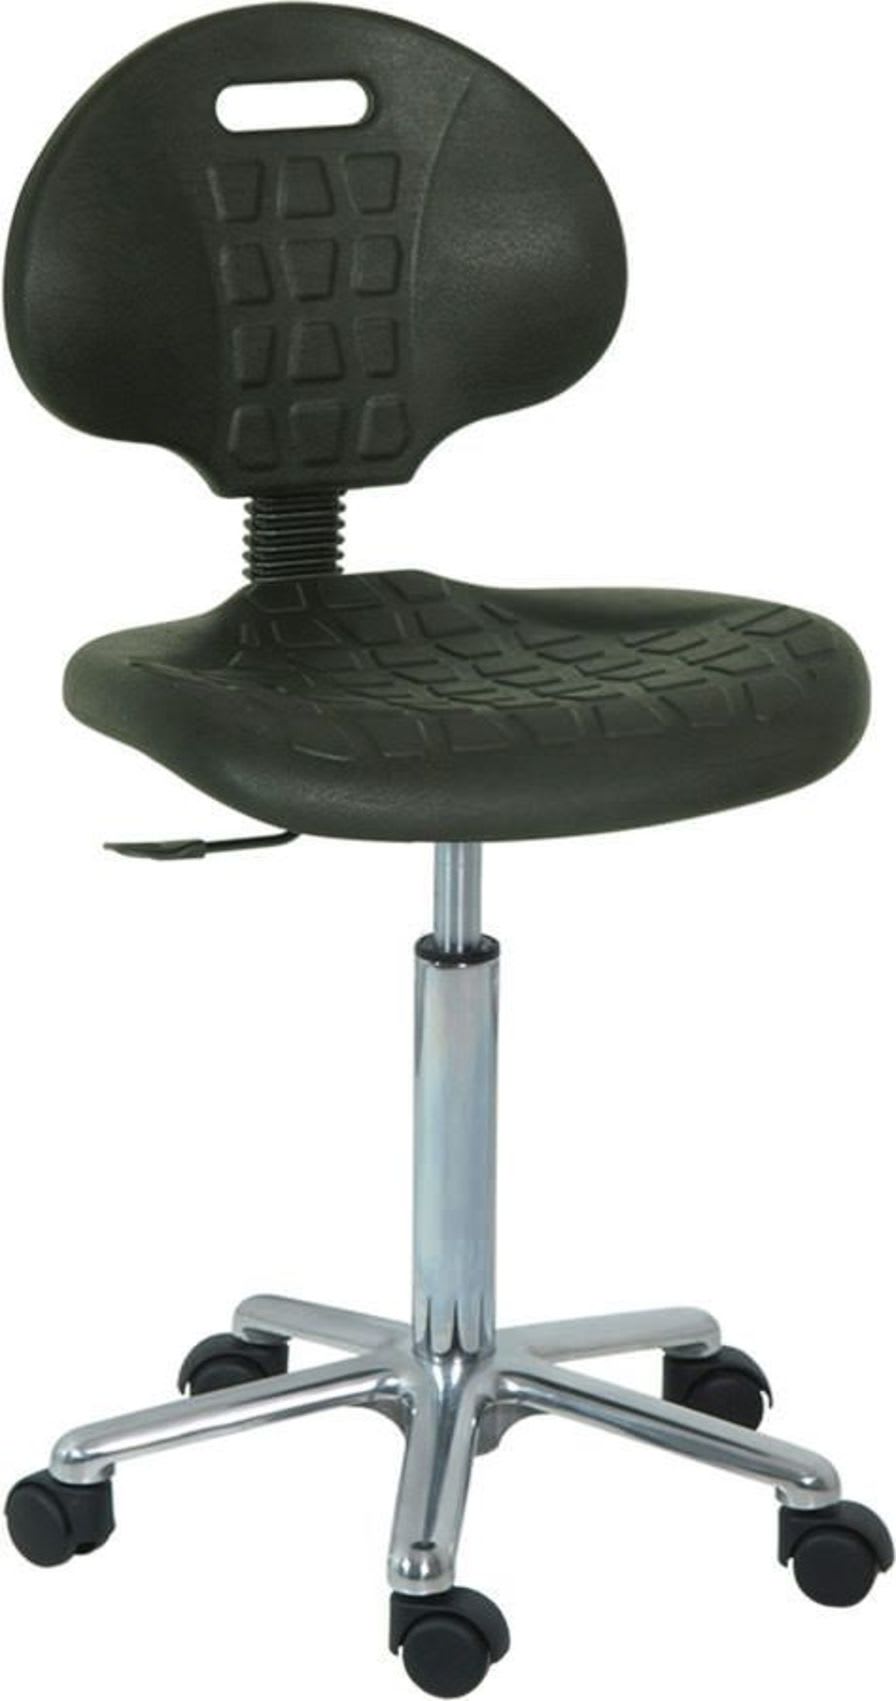 Medical stool / on casters / height-adjustable / with backrest H-195 Hidemar